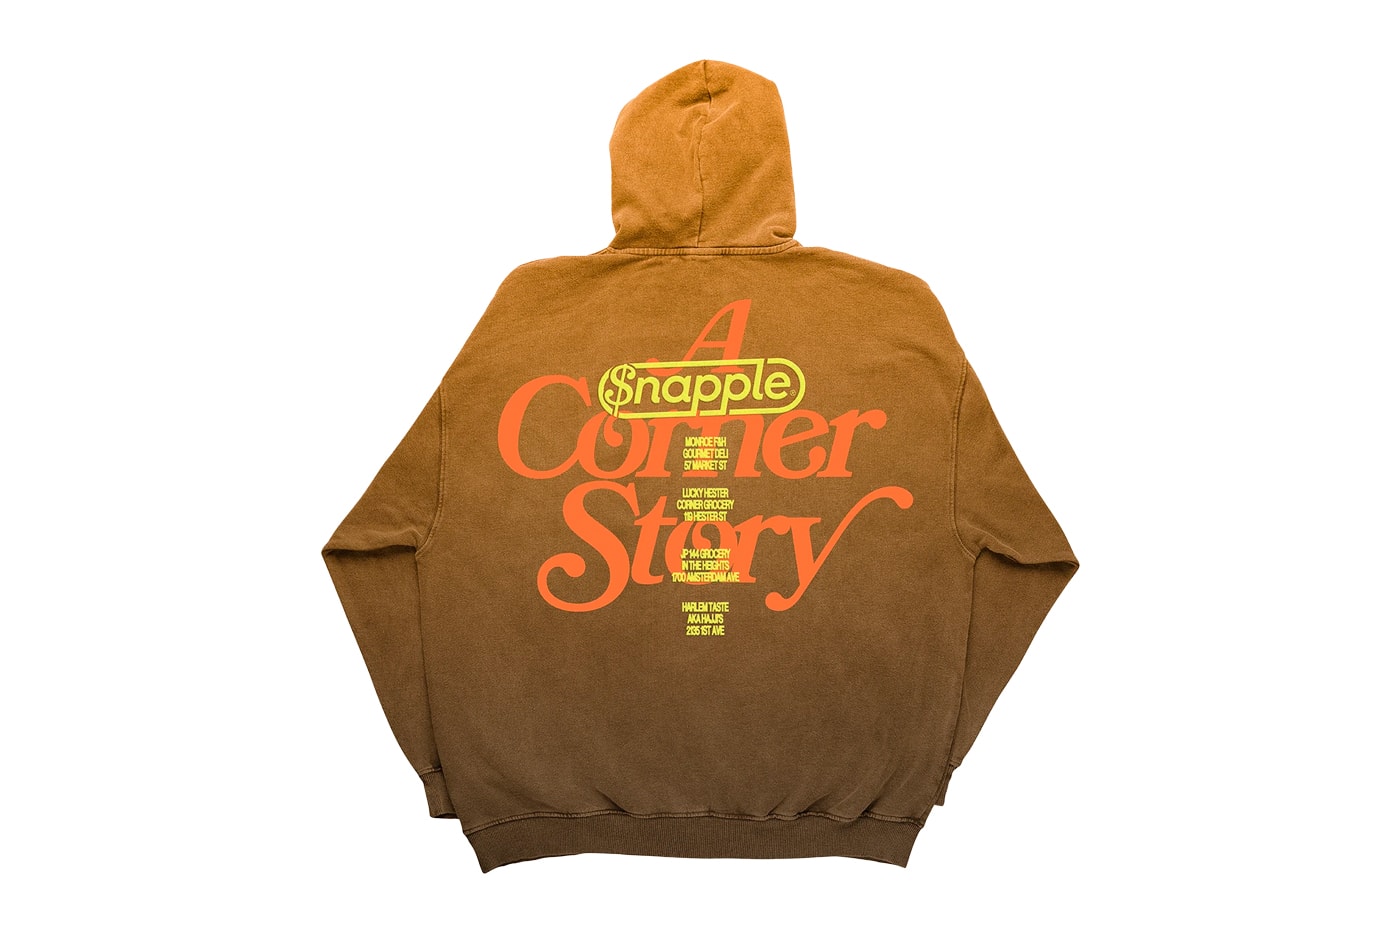 A$AP Ferg A Snapple Corner Story Collection Release Info The Bodega and Small Business Group Buy Price 